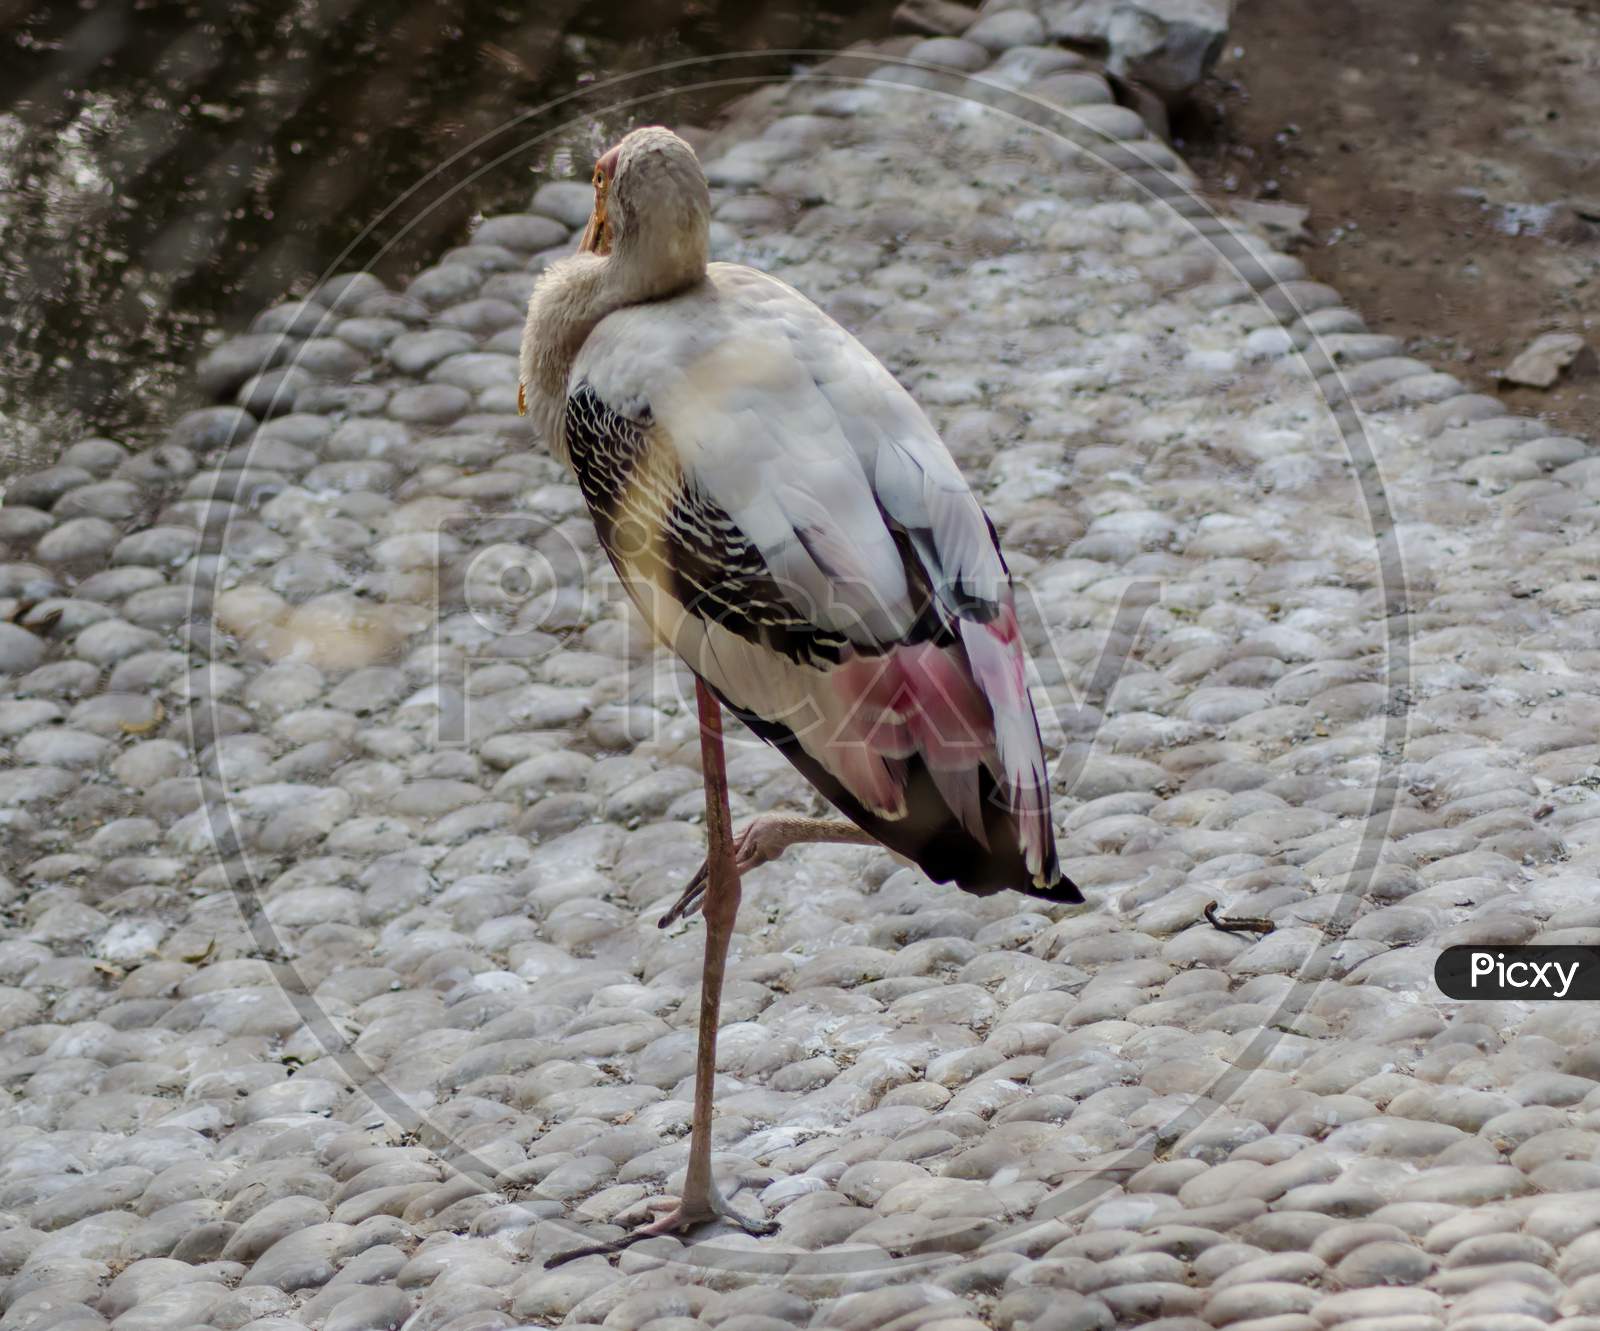 Storks are large, long-legged, long-necked wading birds with long, stout bills.